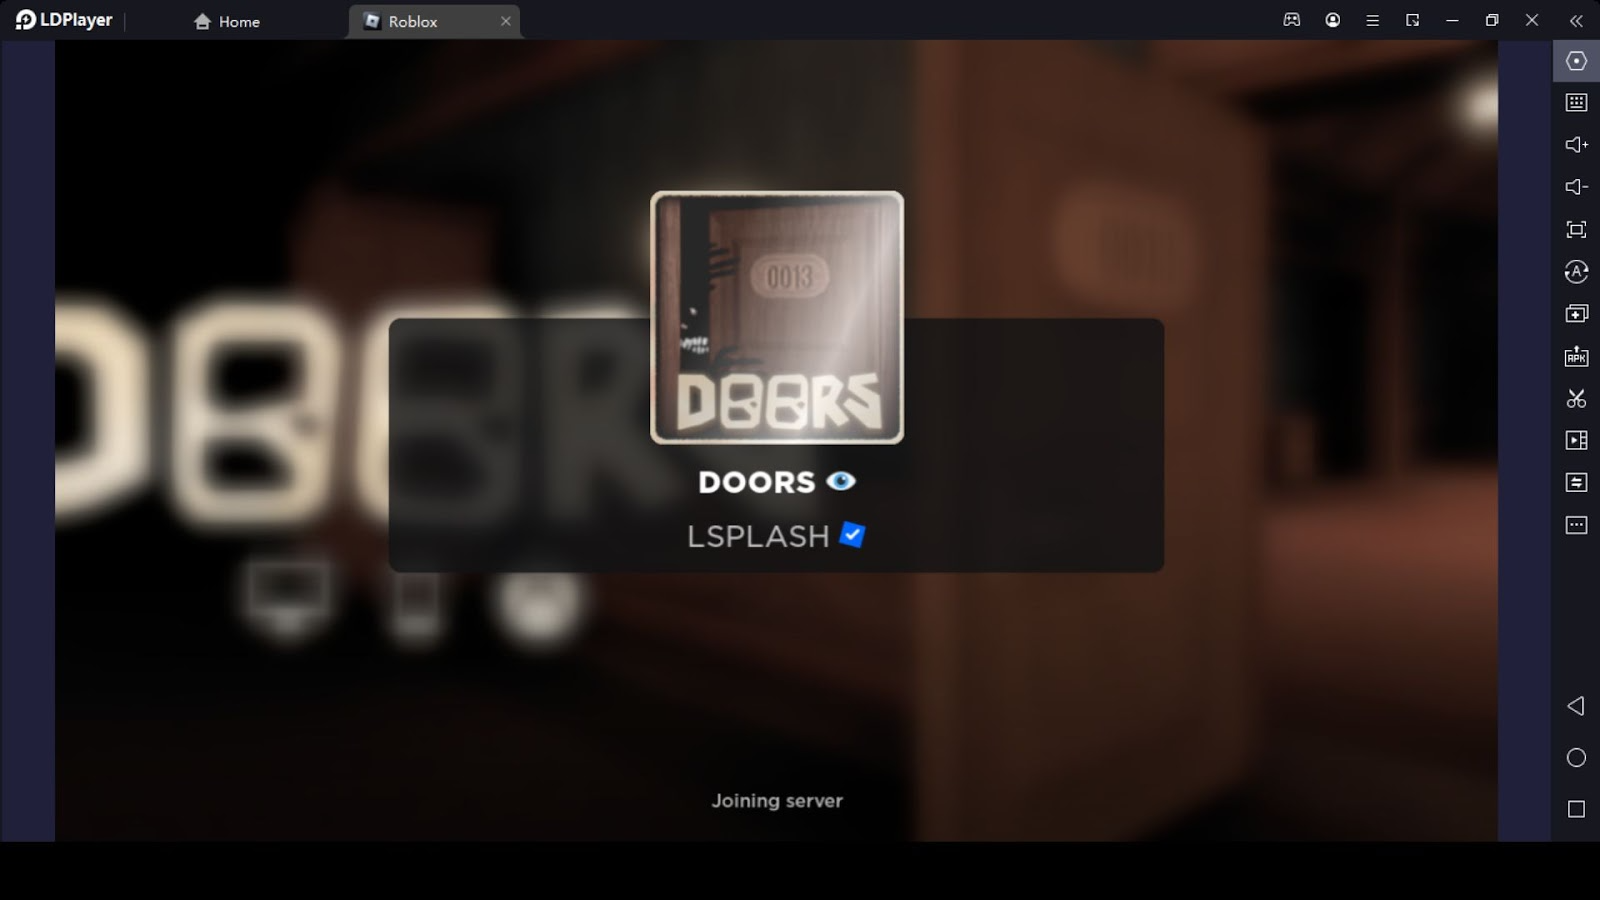 Roblox Doors Hotel Update New Seek Chase Animation & Jumpscares 